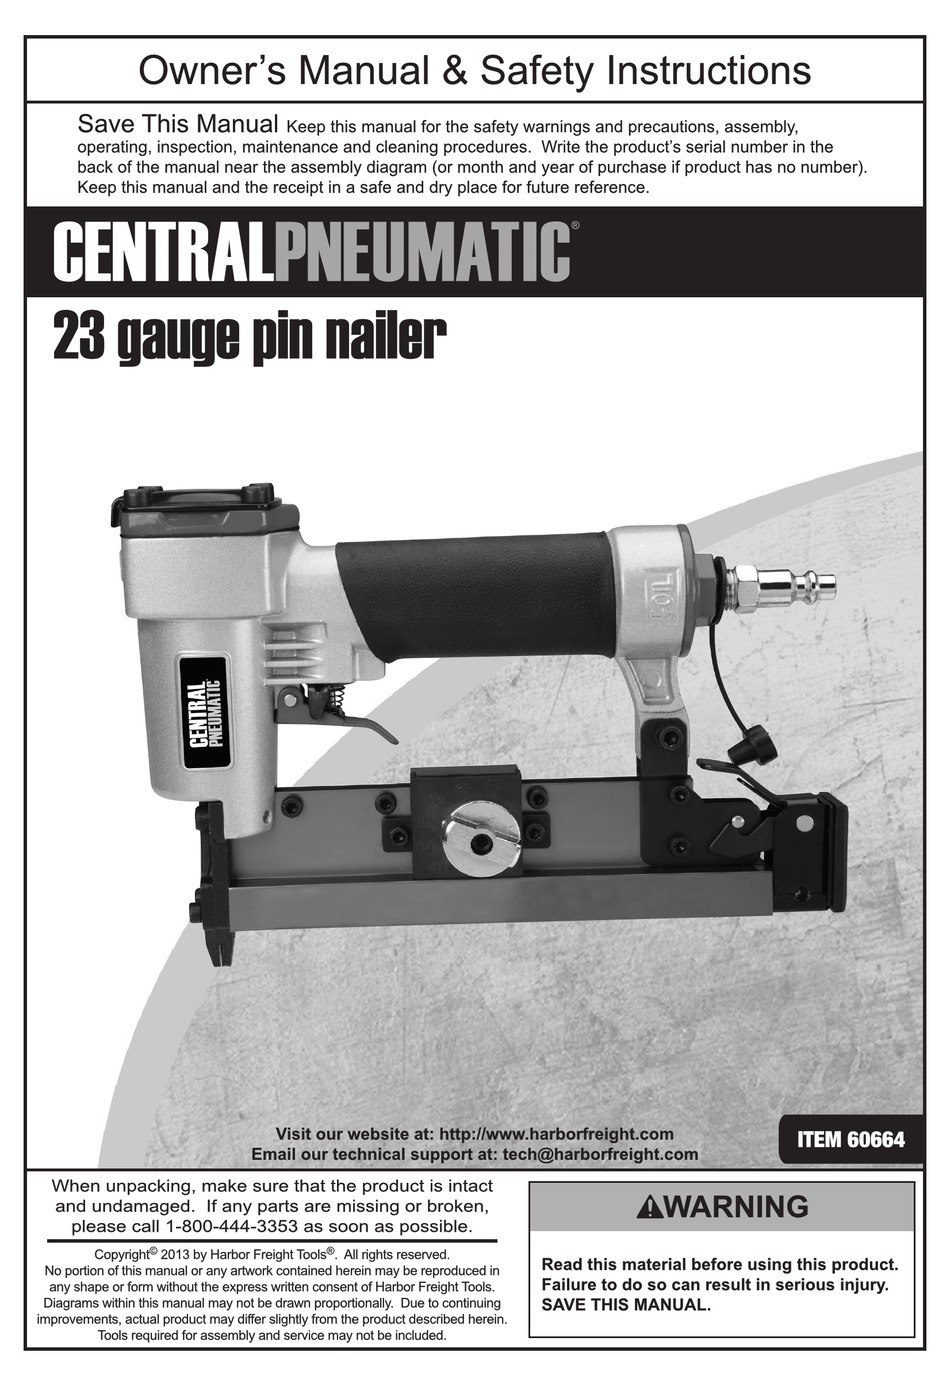 Harbor Freight Tools Central Pneumatic Owner S Manual Safety Instructions Pdf Download Manualslib